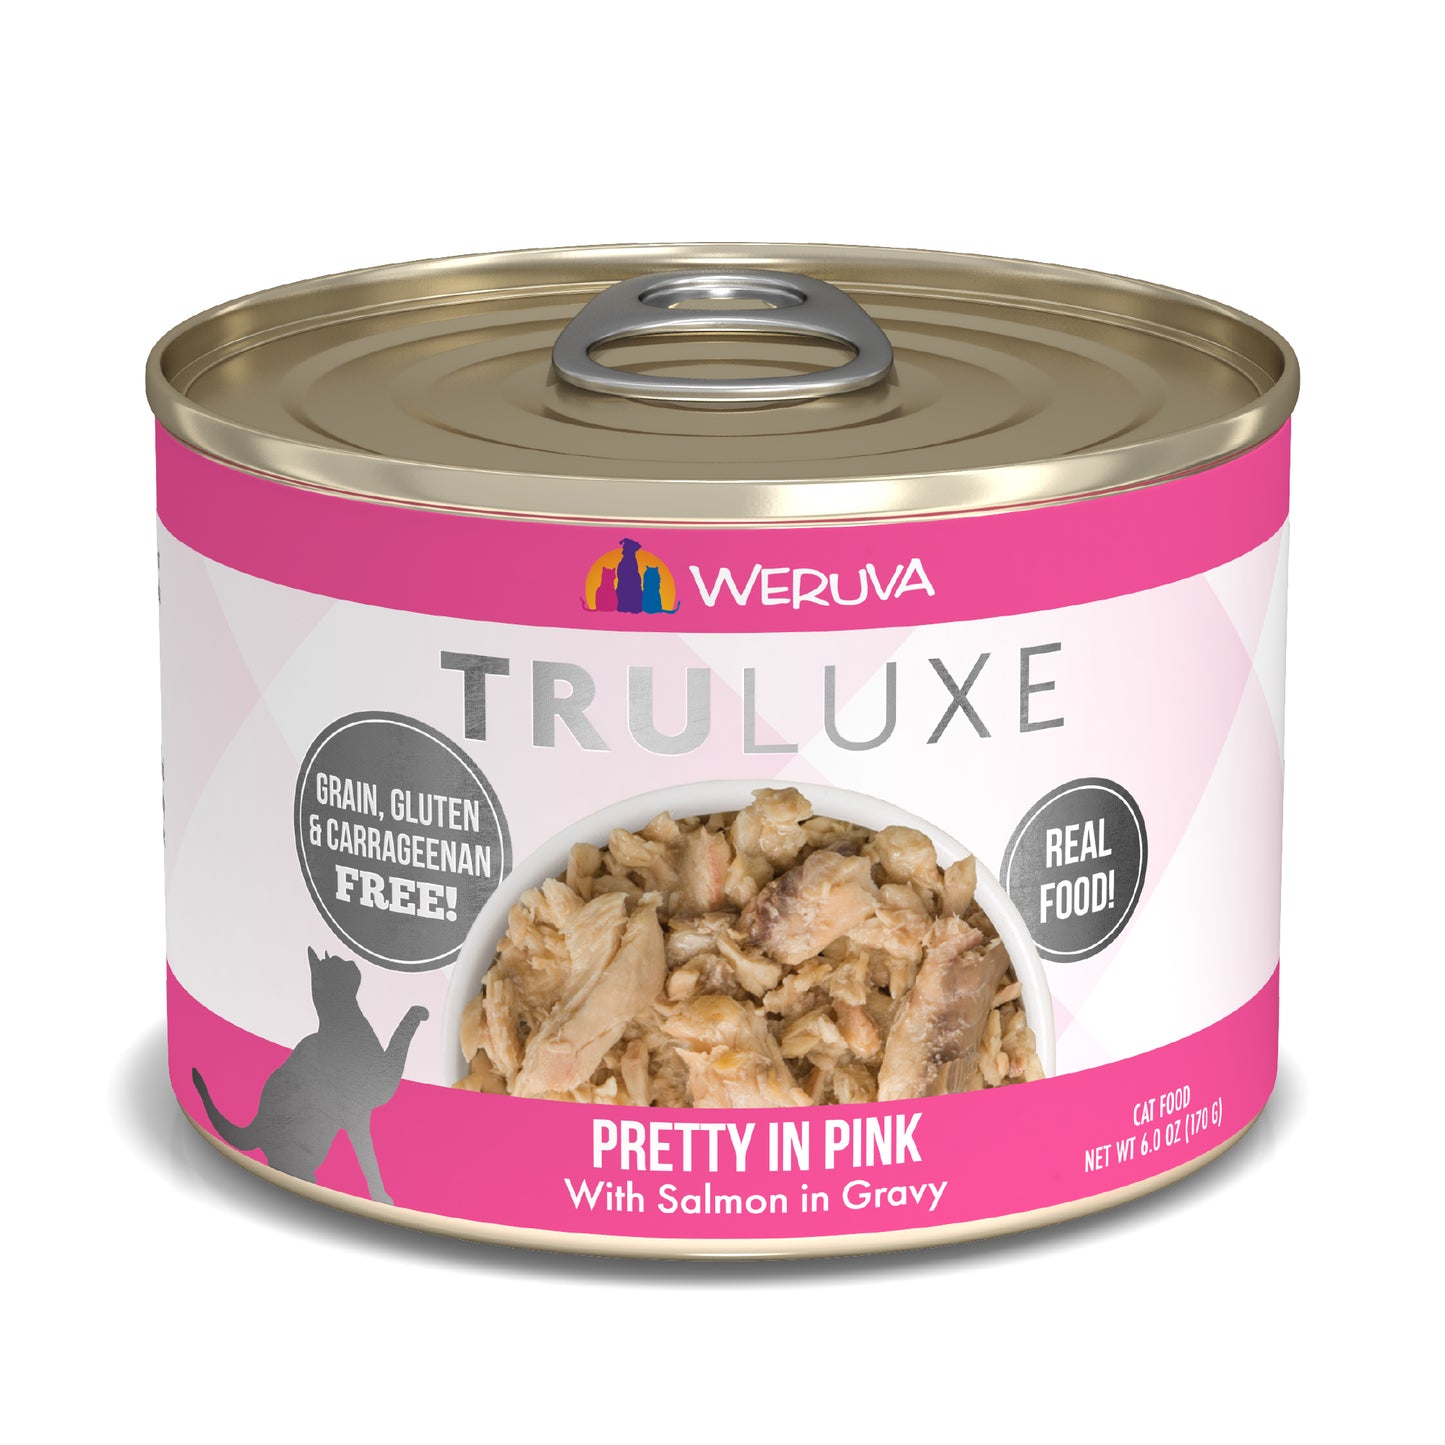 Weruva Truluxe Cat food 6oz Can Honor Roll